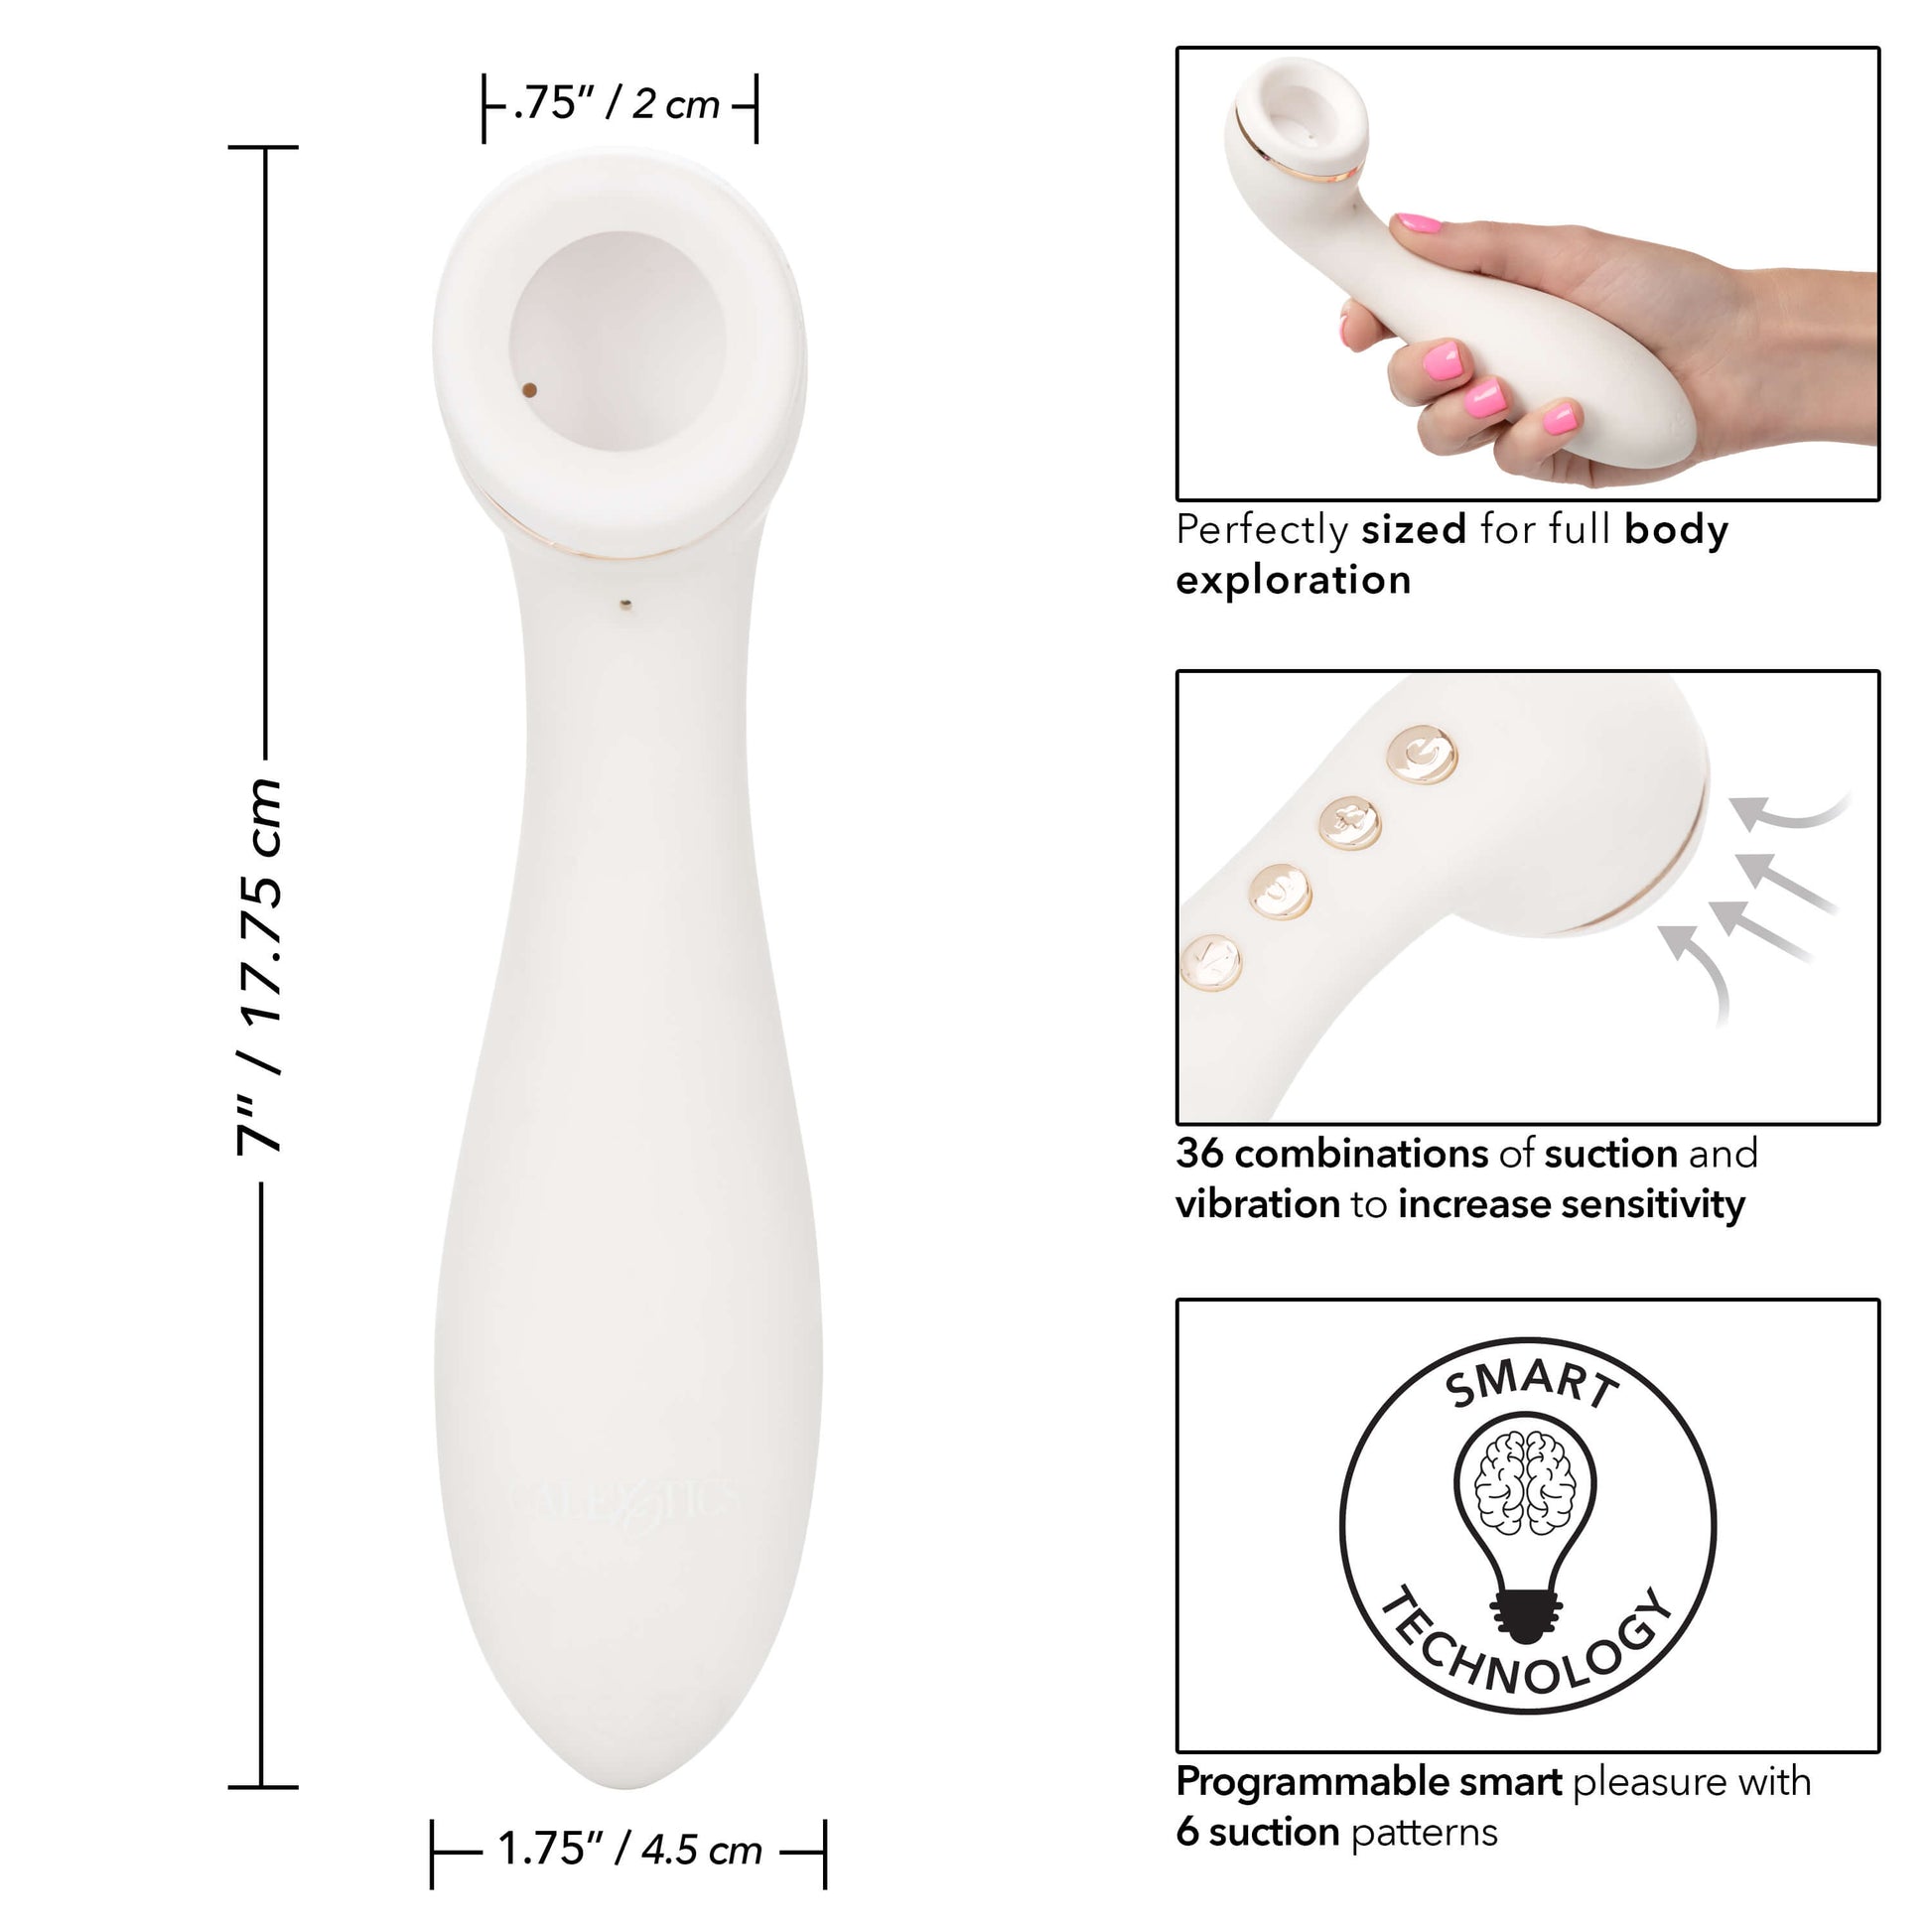 Features of the Empowered Smart Pleasure Idol - CalExotics - The Bigger O online sex toy shop USA, Canada & UK shipping available